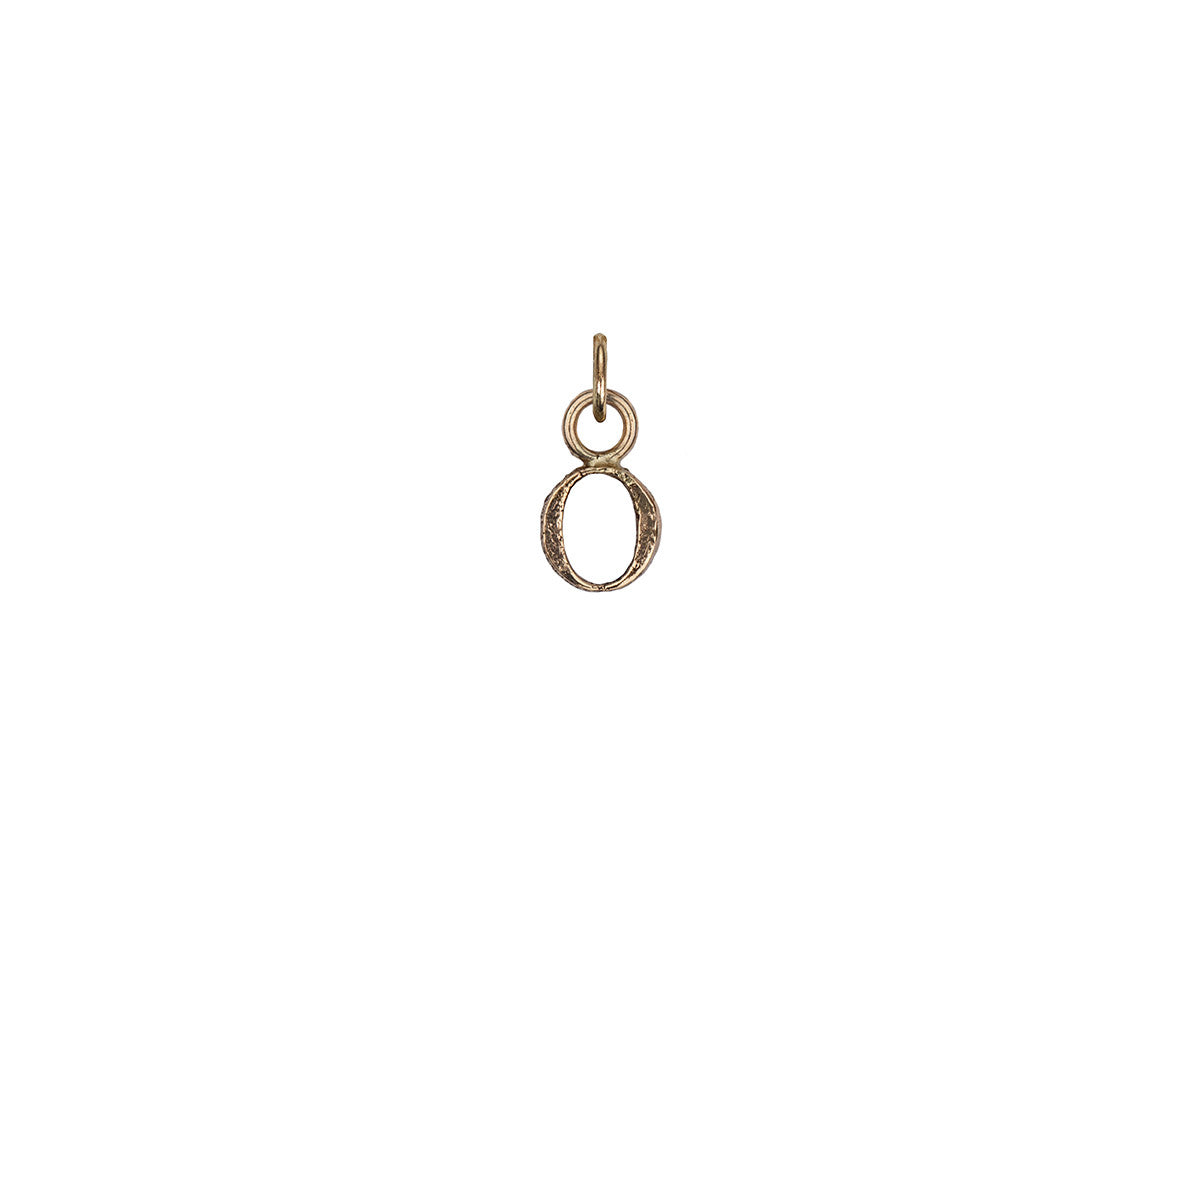 A 14k gold charm in the shape of the letter "O".